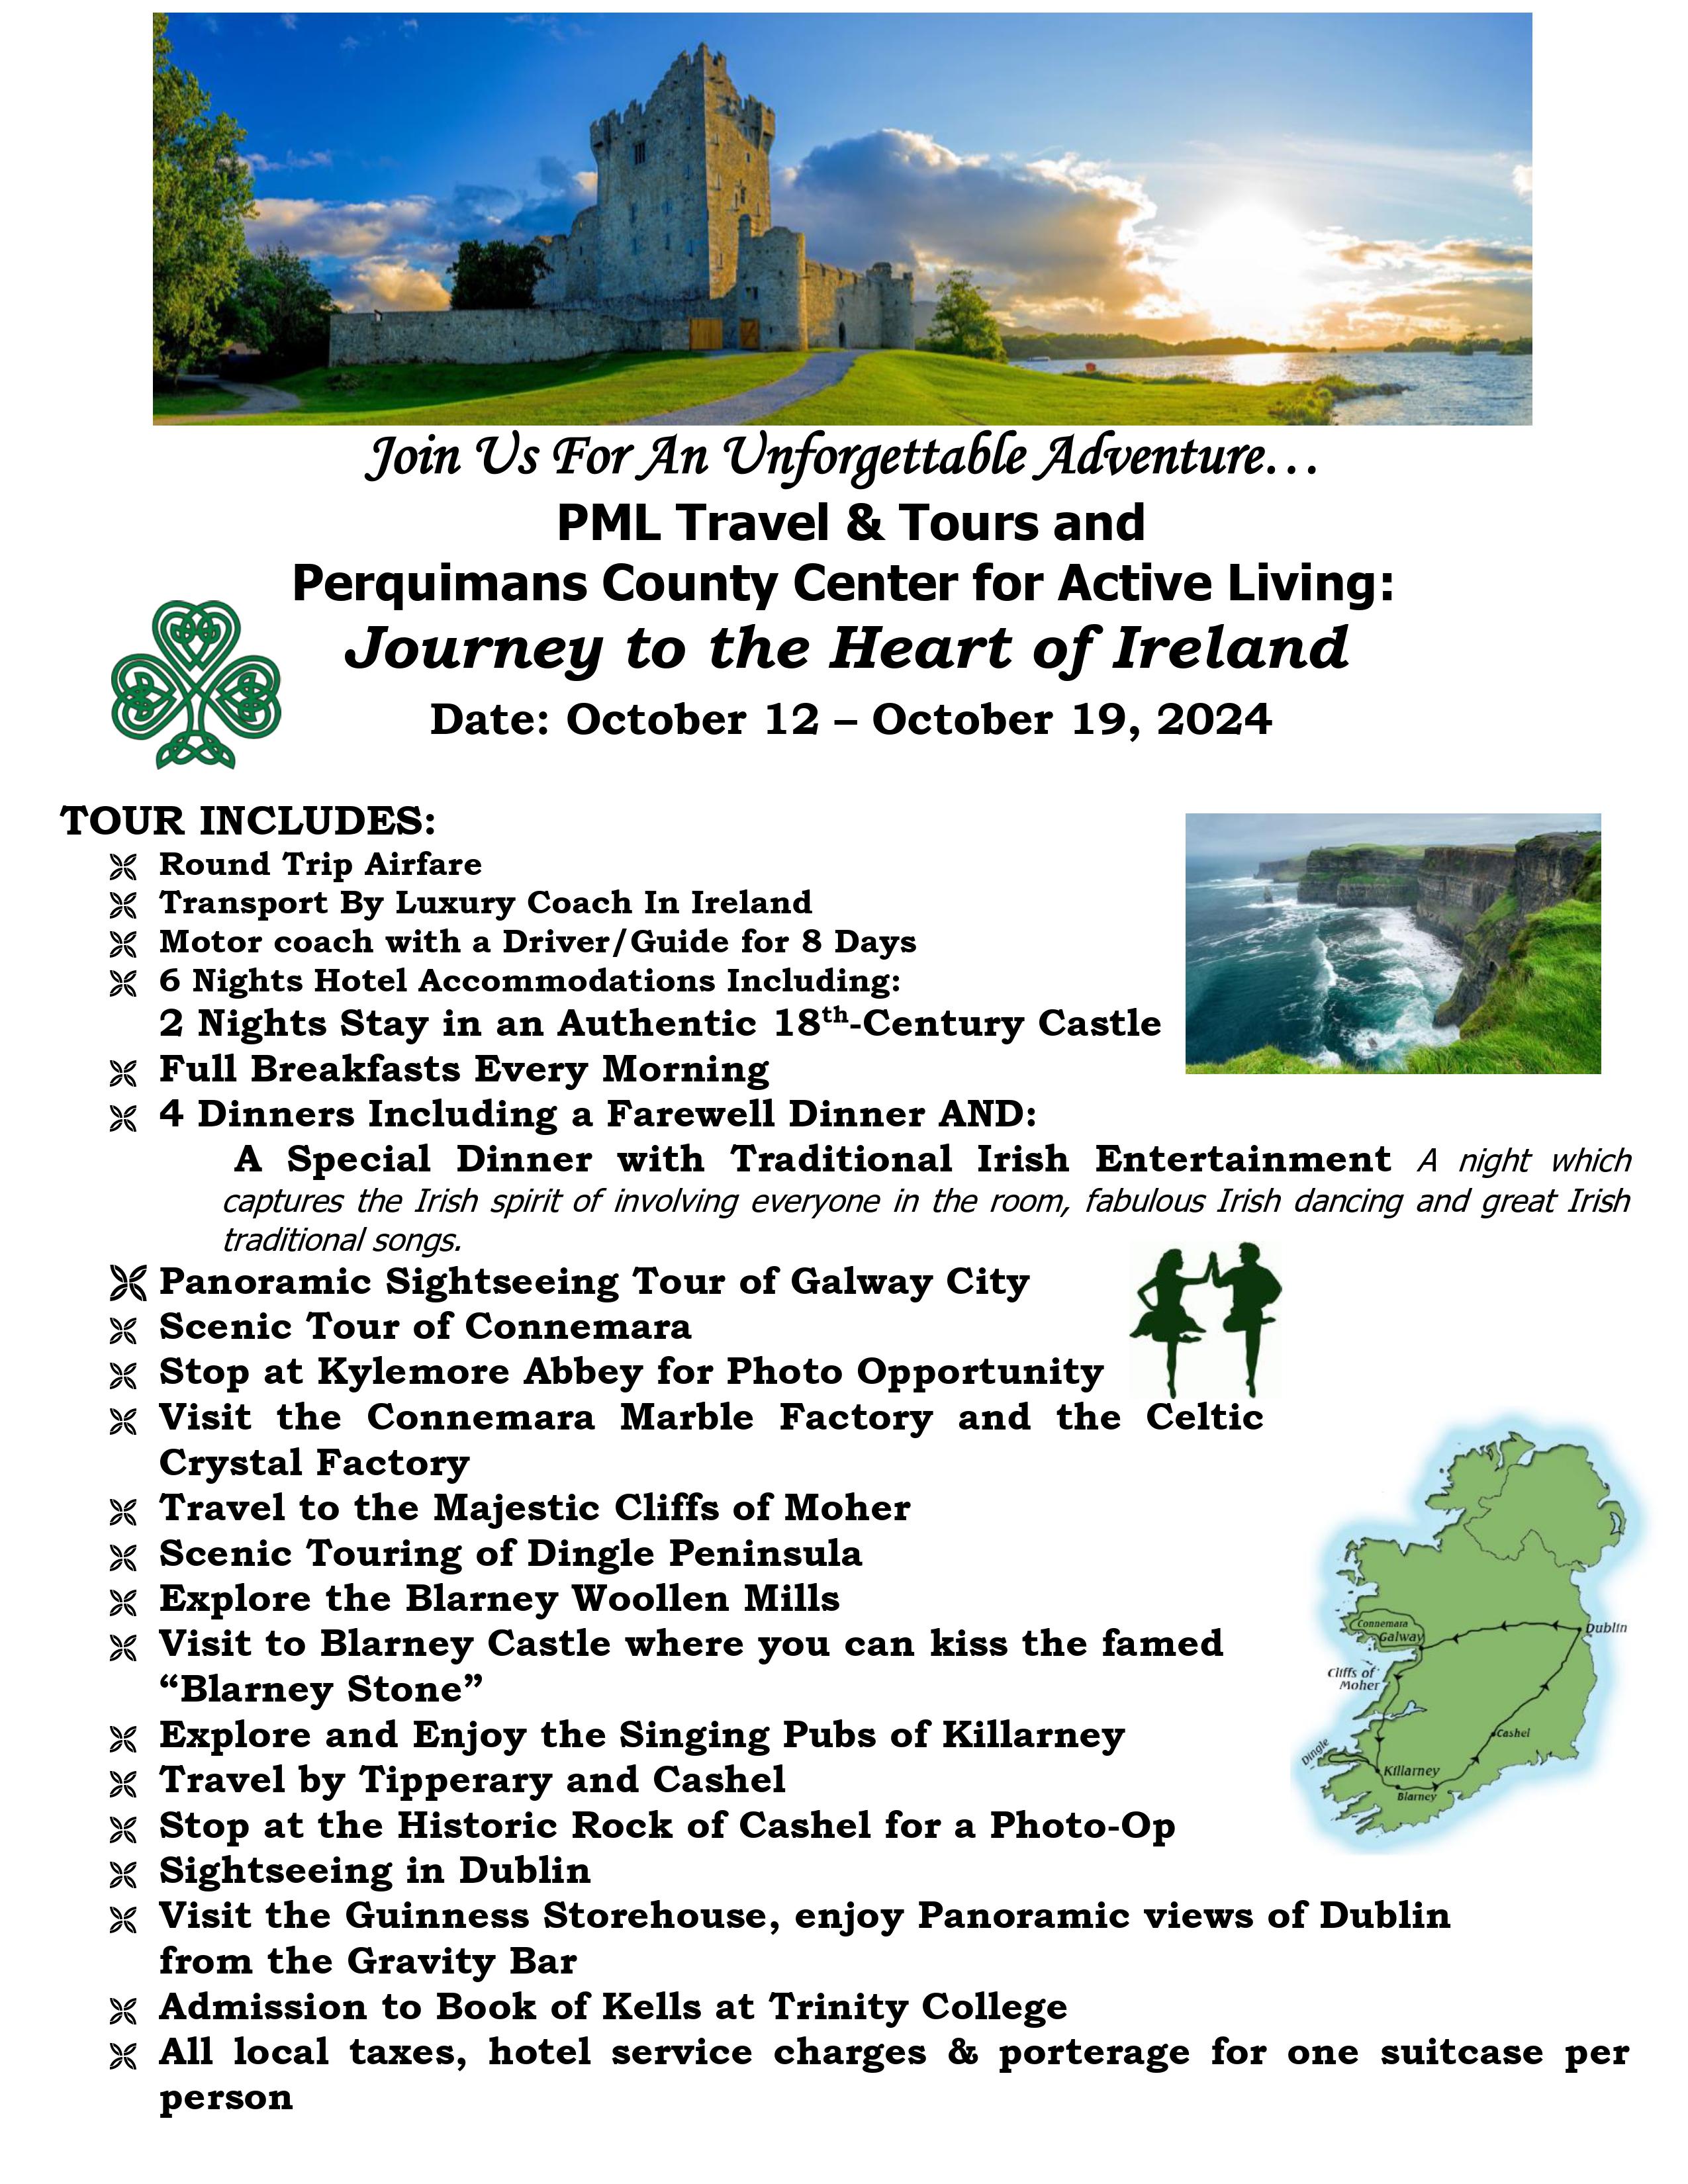 Journey to the Heart of Ireland October 12 October 19, 2024